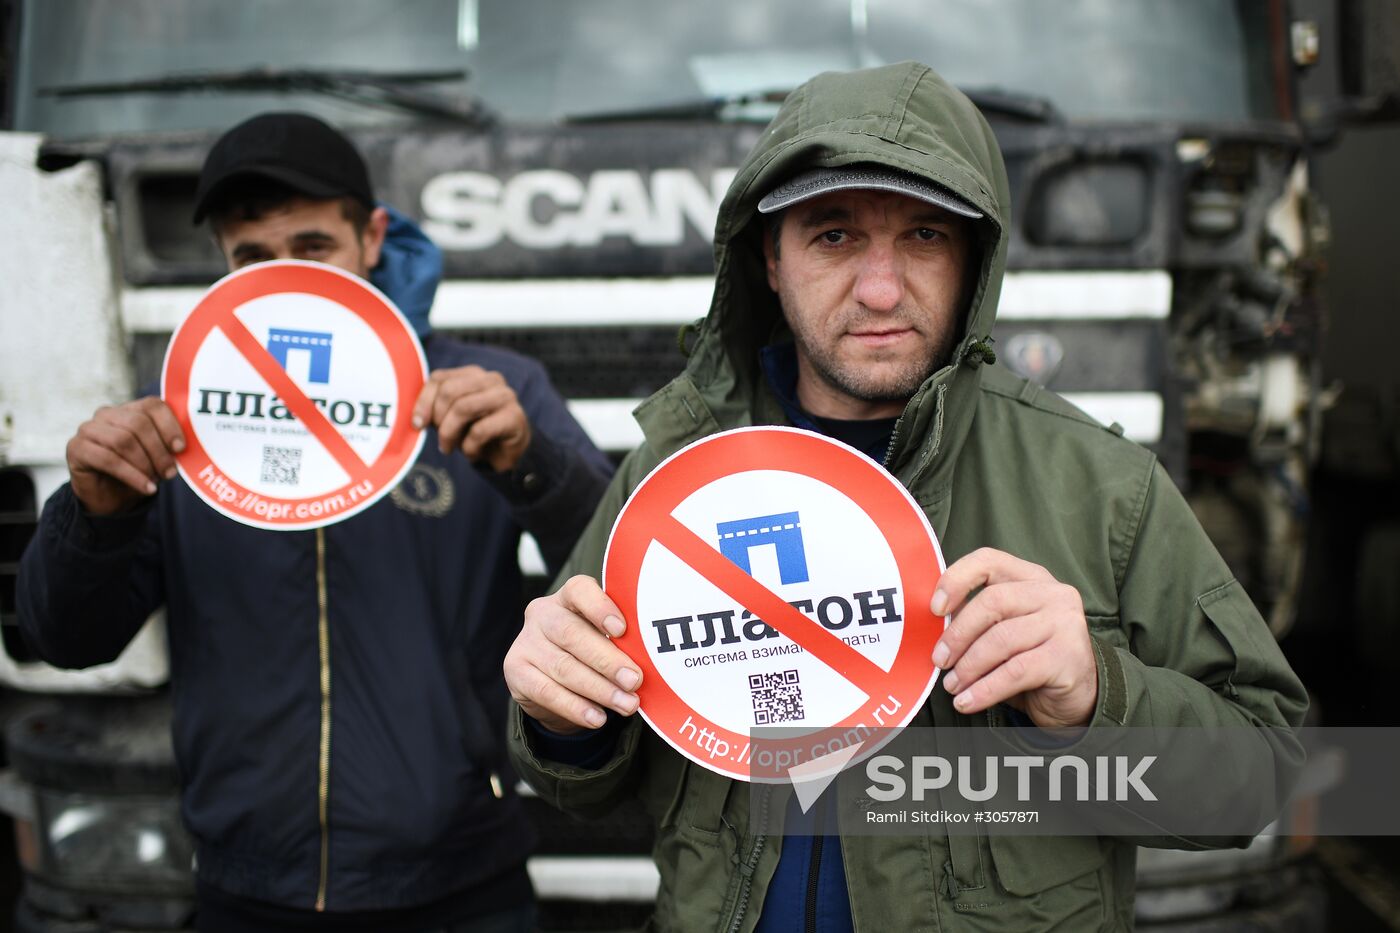 Truckers protest against Platon system